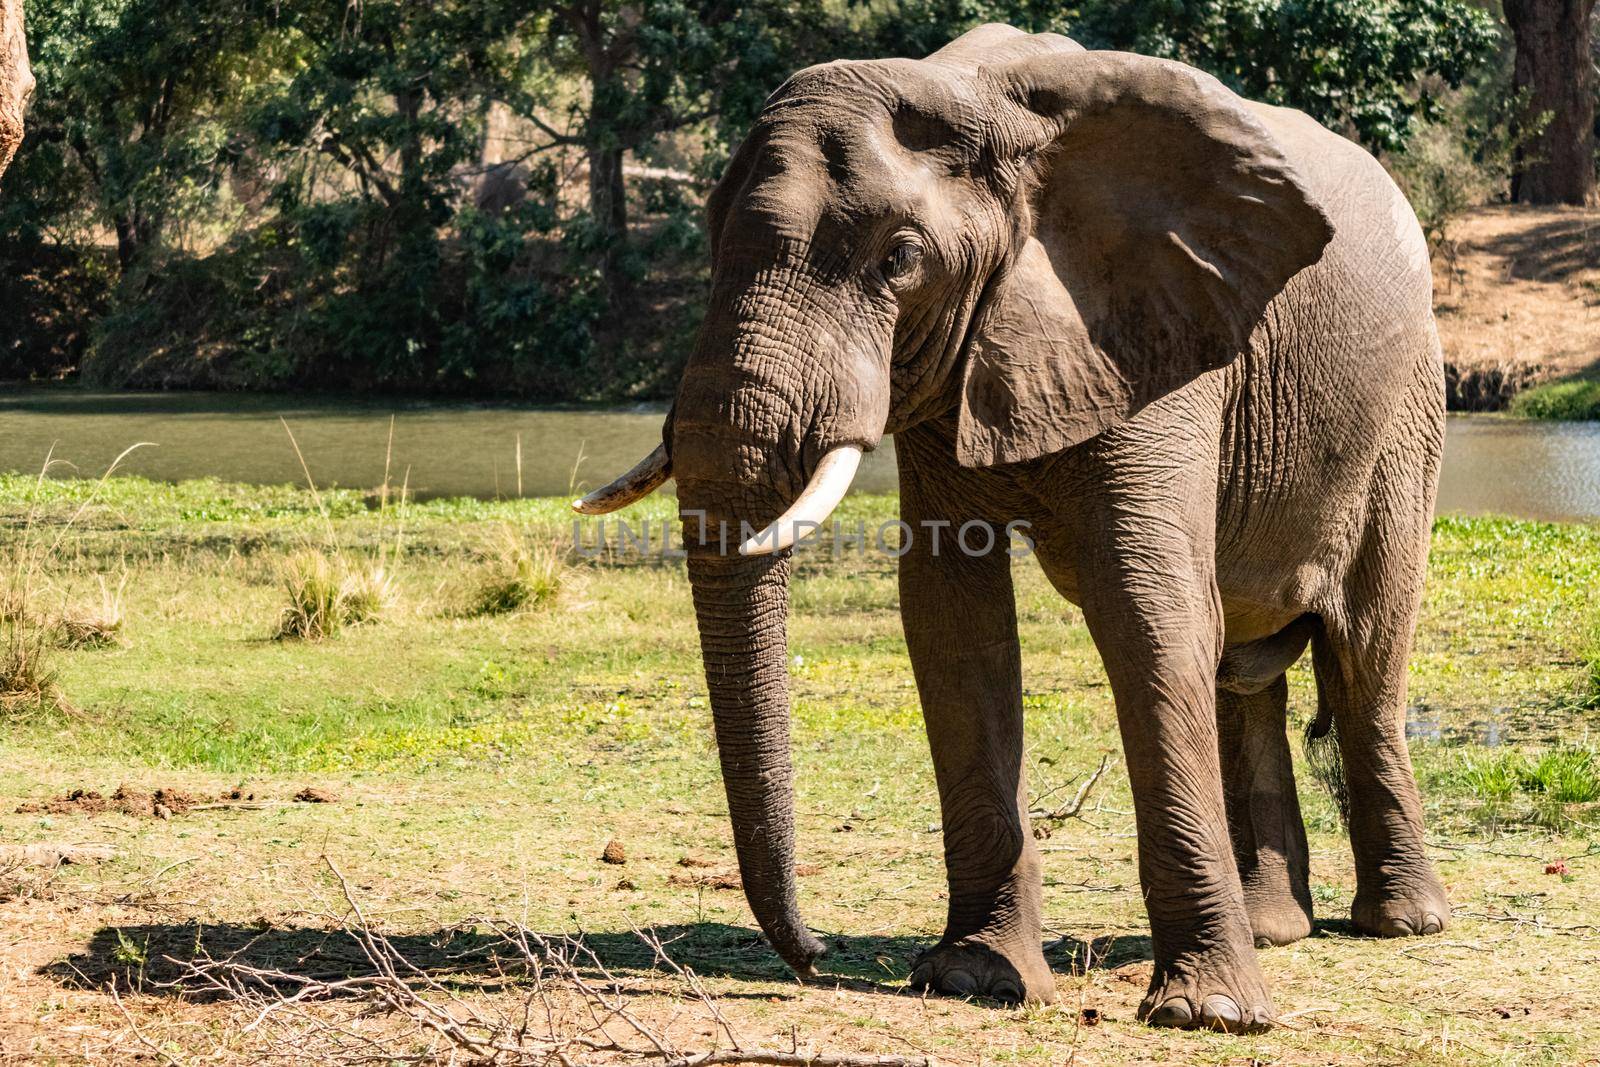 An amazing close up of a huge elephant moving in the bush